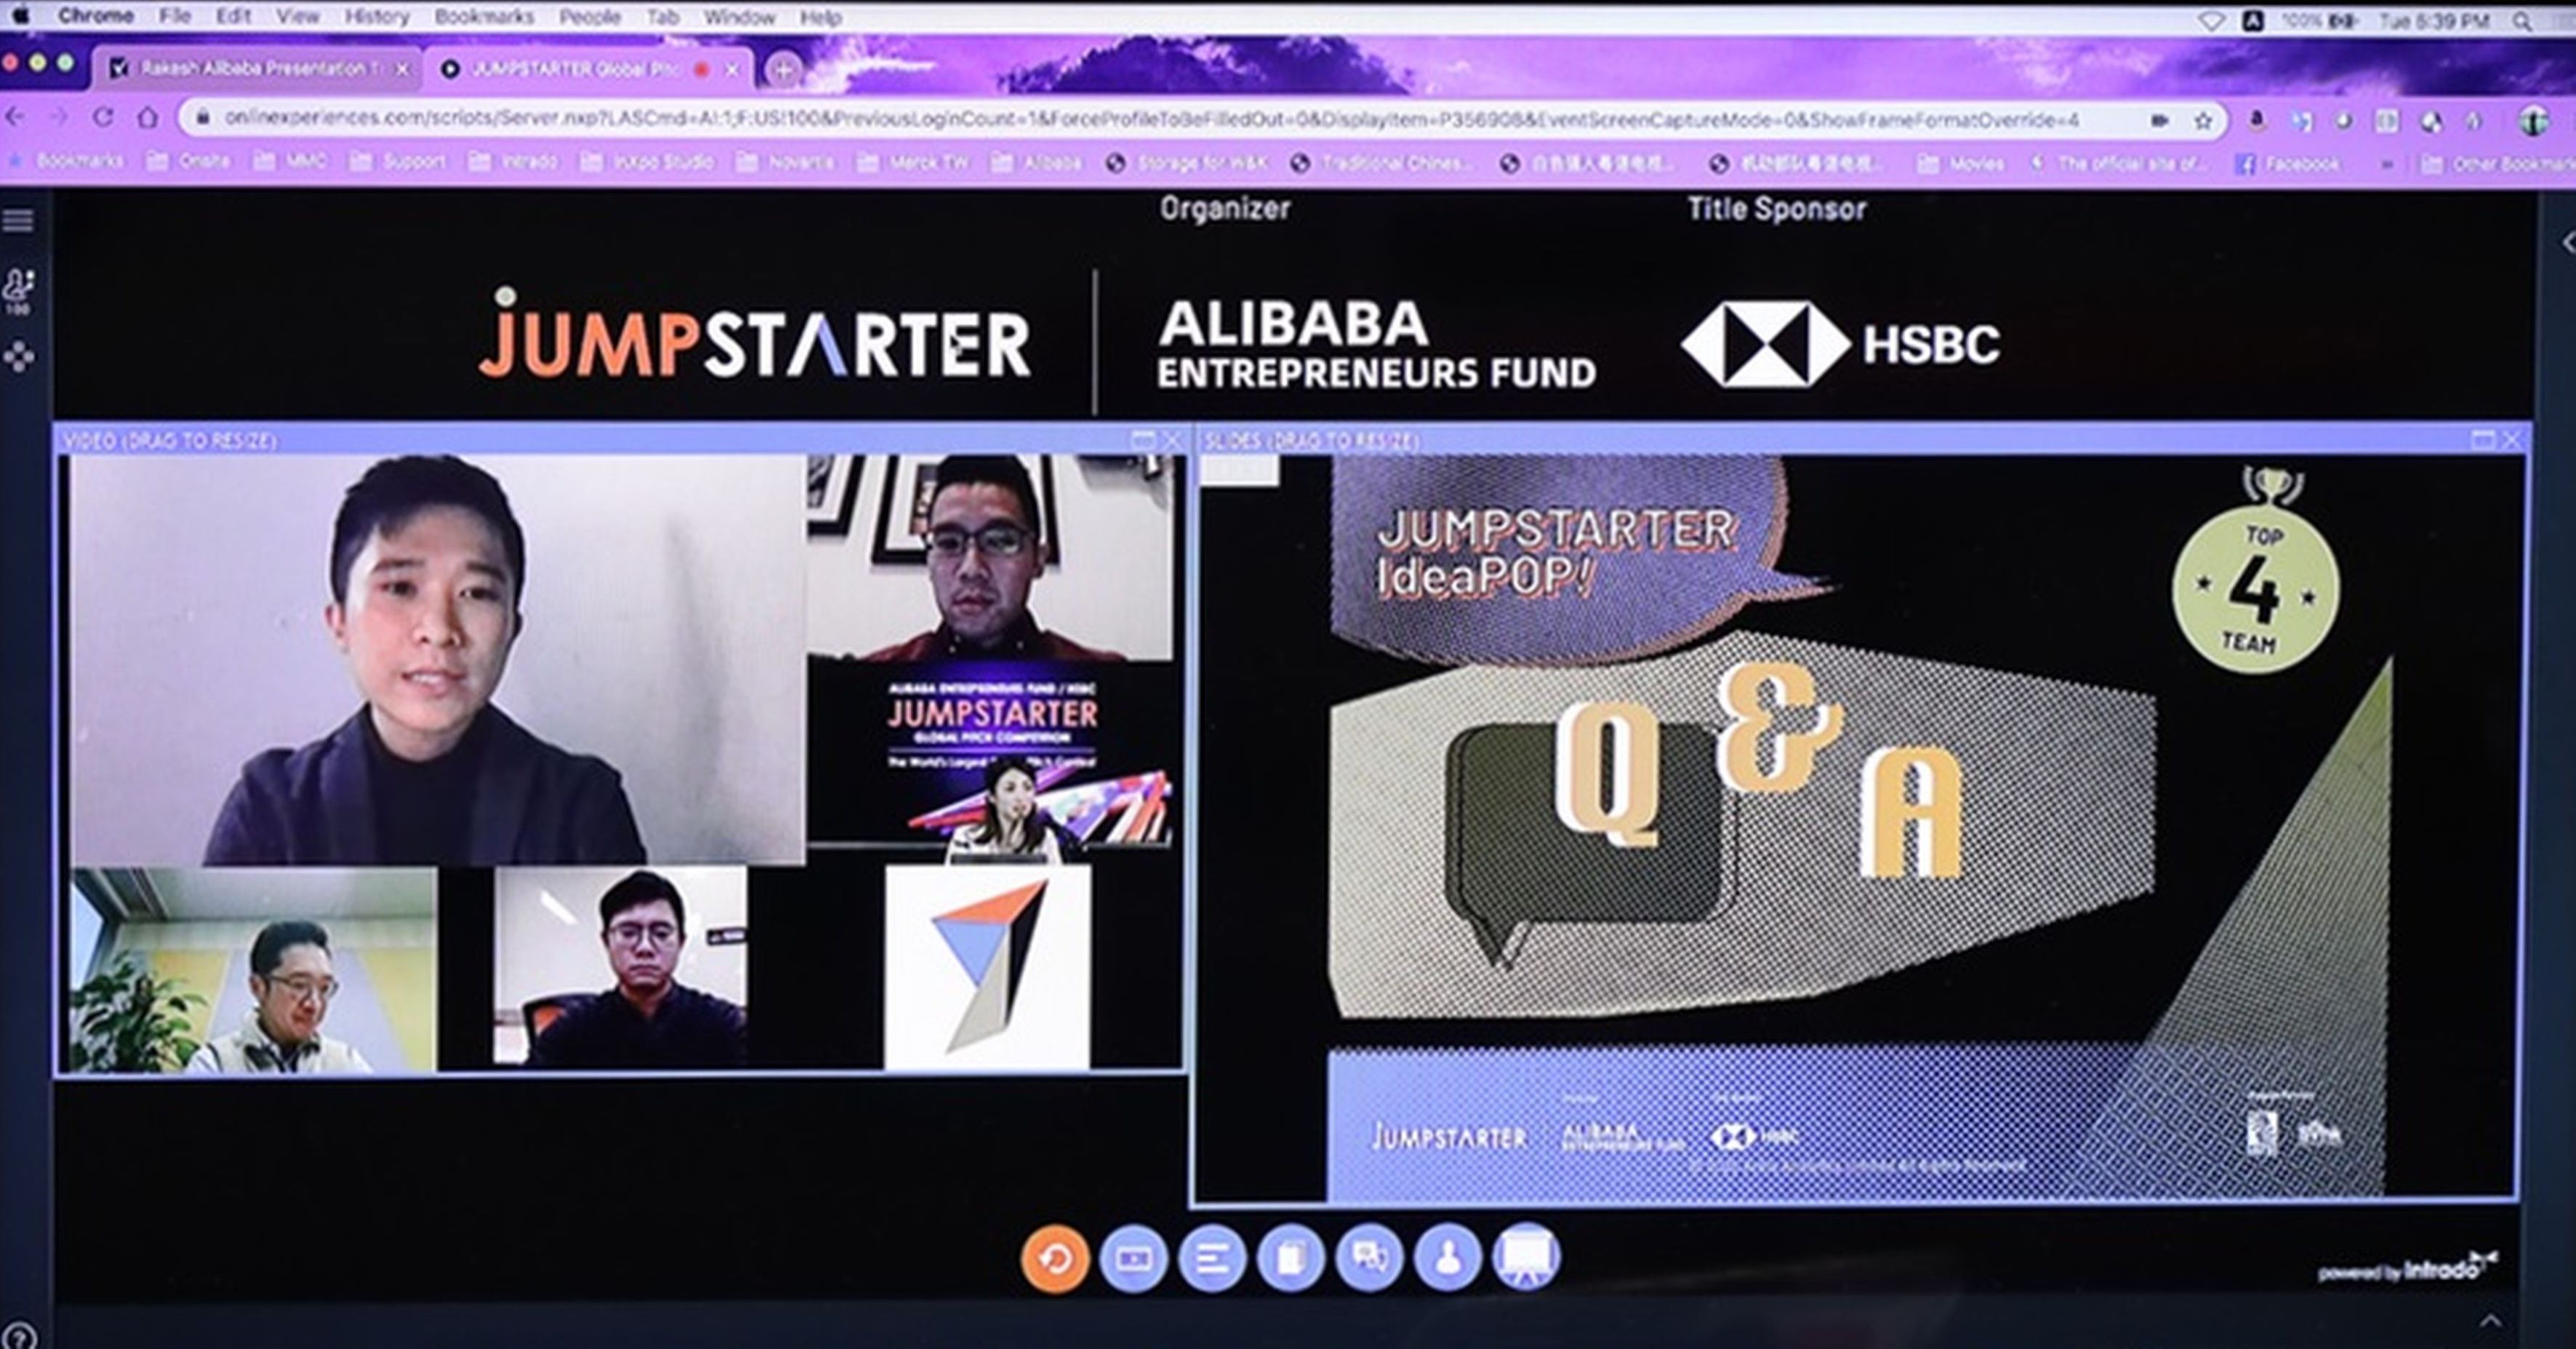 Alibaba Hong Kong Entrepreneurs Fund launches JUMPSTARTER 2021 Global Pitch Competition